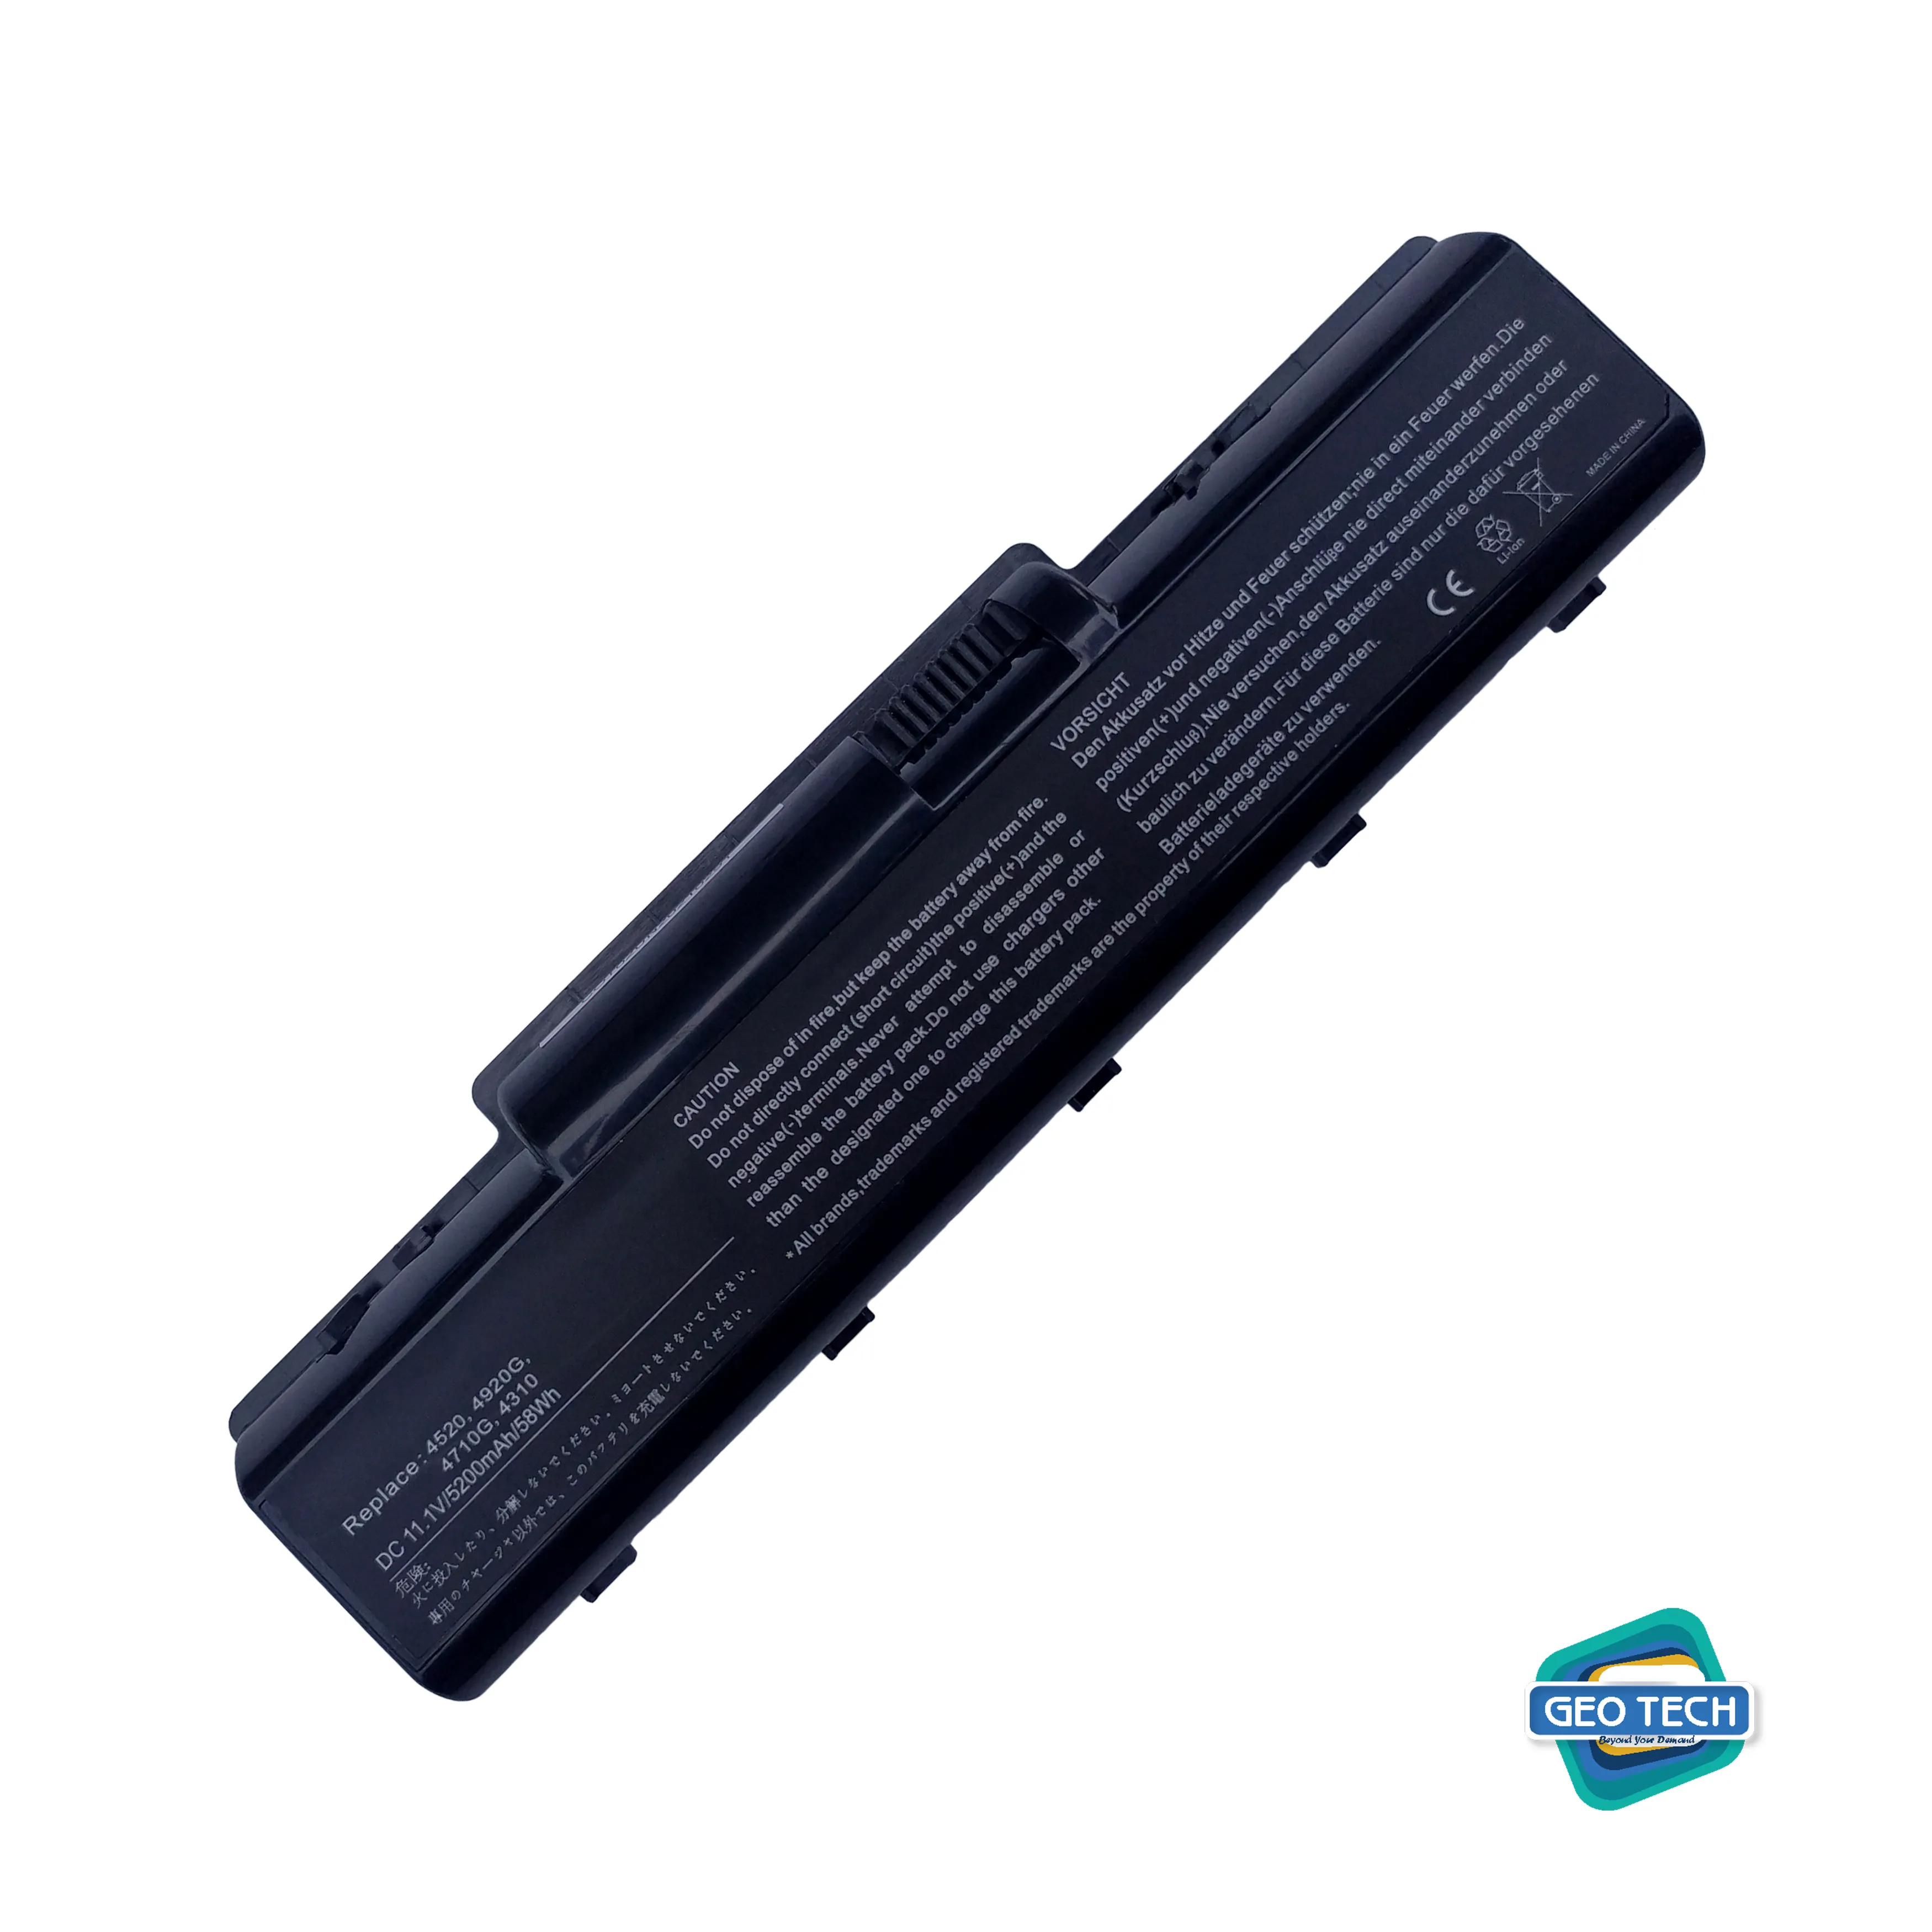 Replacement Laptop Battery for Acer Aspire 4310, 4510, 4710, 4920, AS07A31